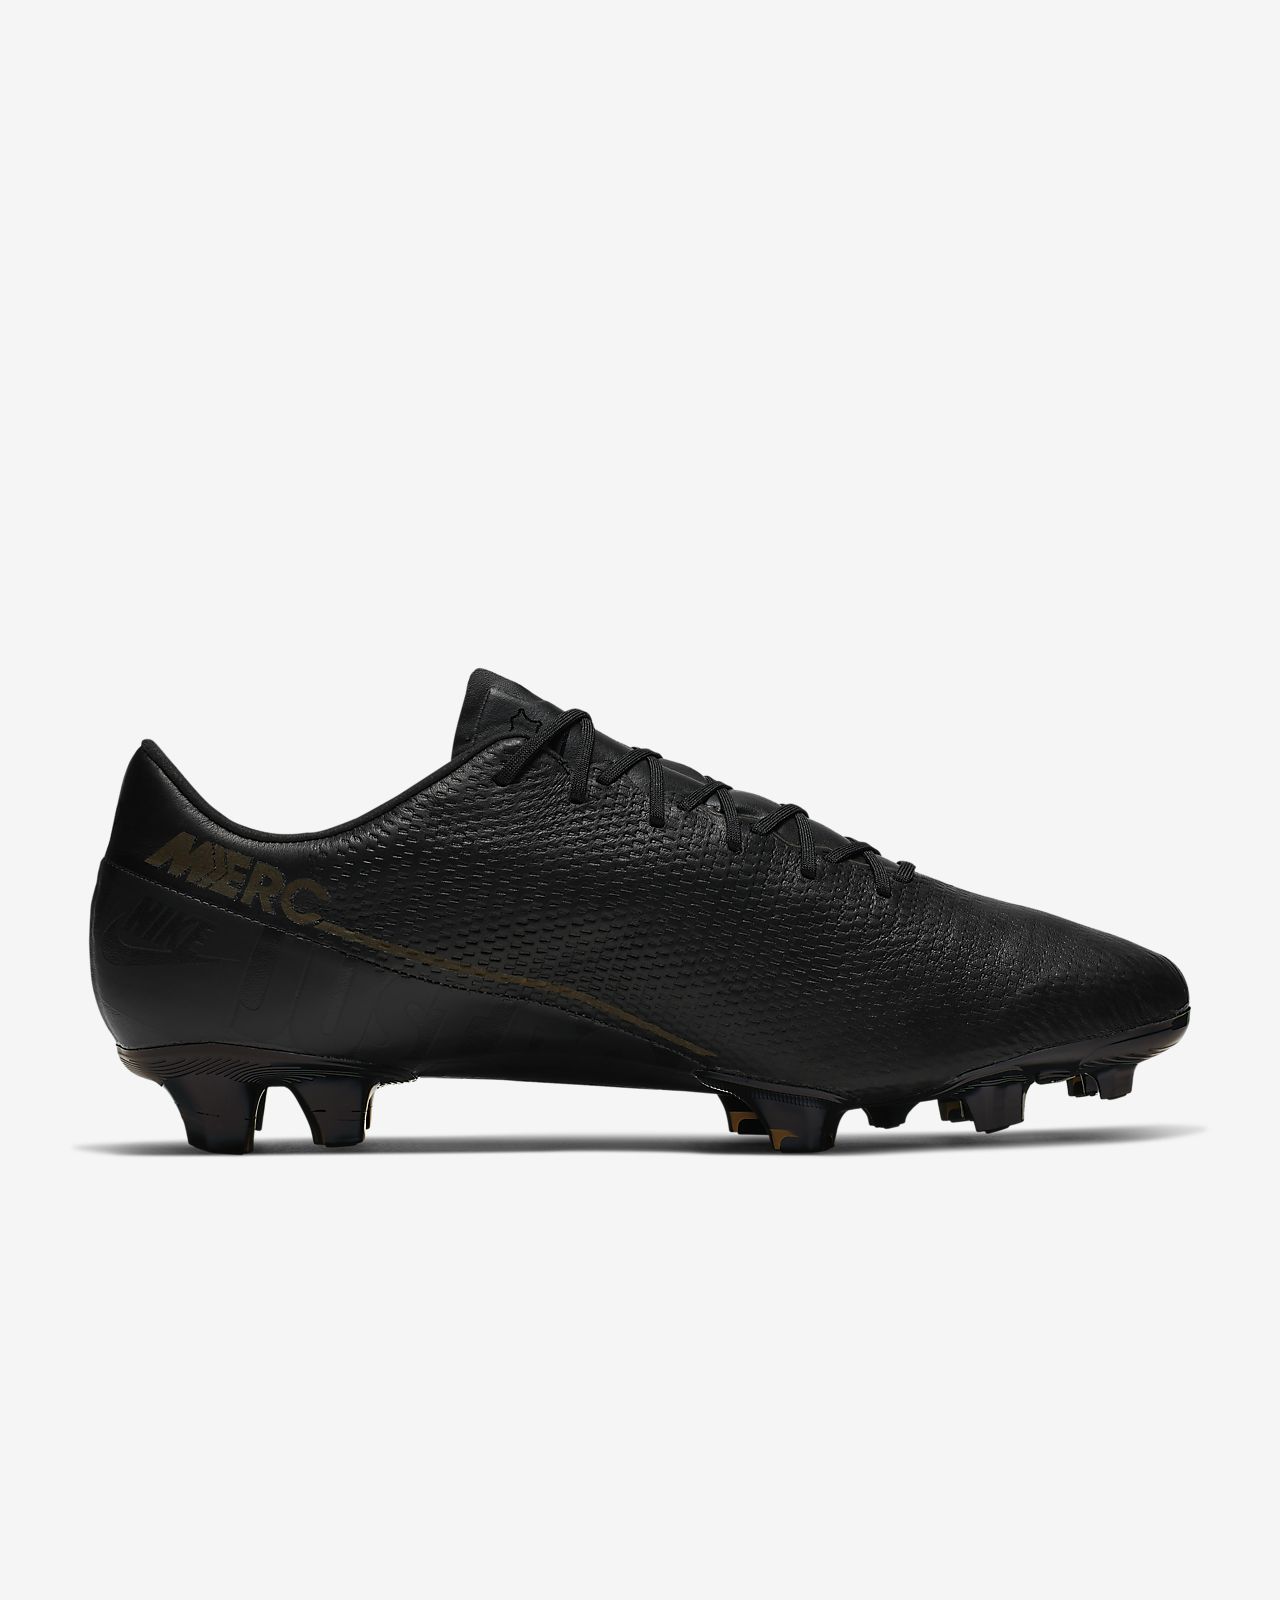 Mercurial Vapor 13 Elite MDS FG Firm Ground Soccer Cleat in.